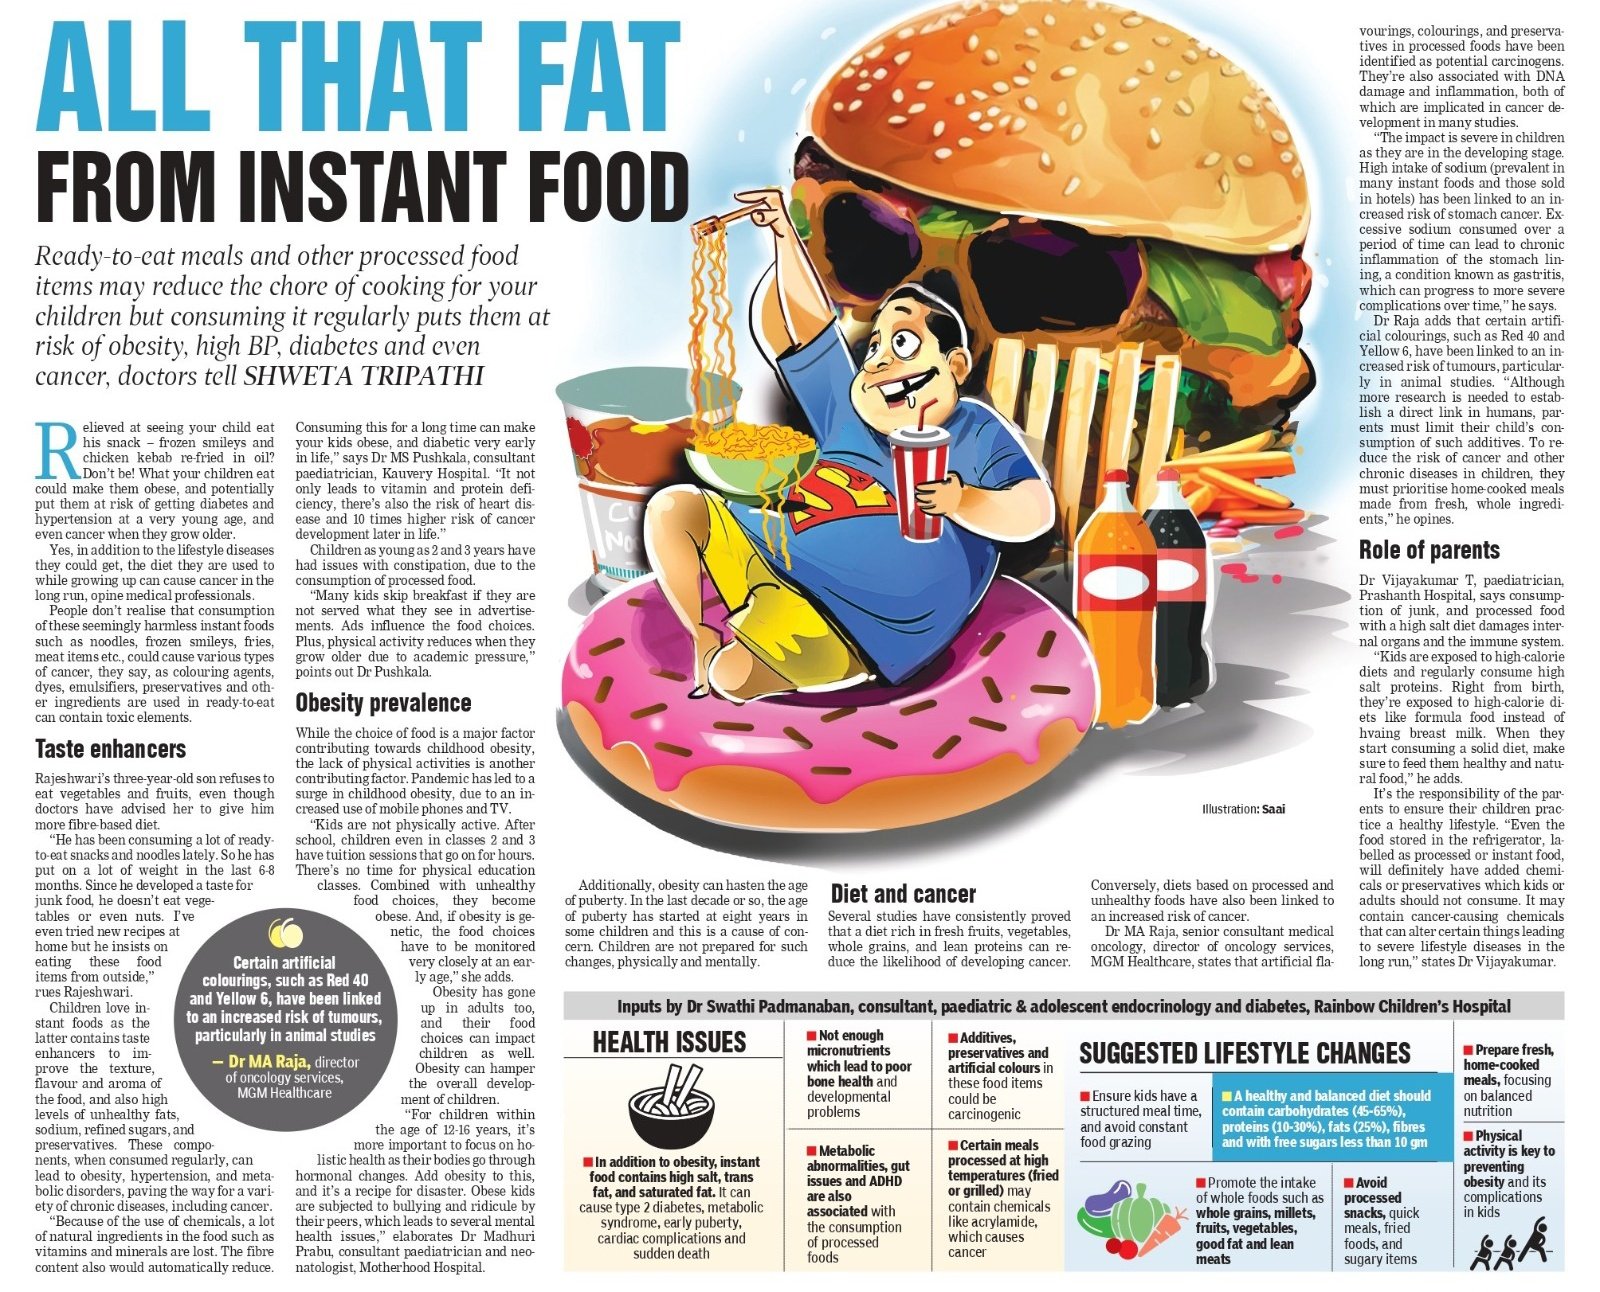 DT Next on X: Don't compromise on your child's #health! #Medicalexperts  warn against regular #consumption of instant #foods citing risks of  #obesity, #diabetes, #hypertension &even #cancer.To know hidden dangers in  #processedsnacks, read